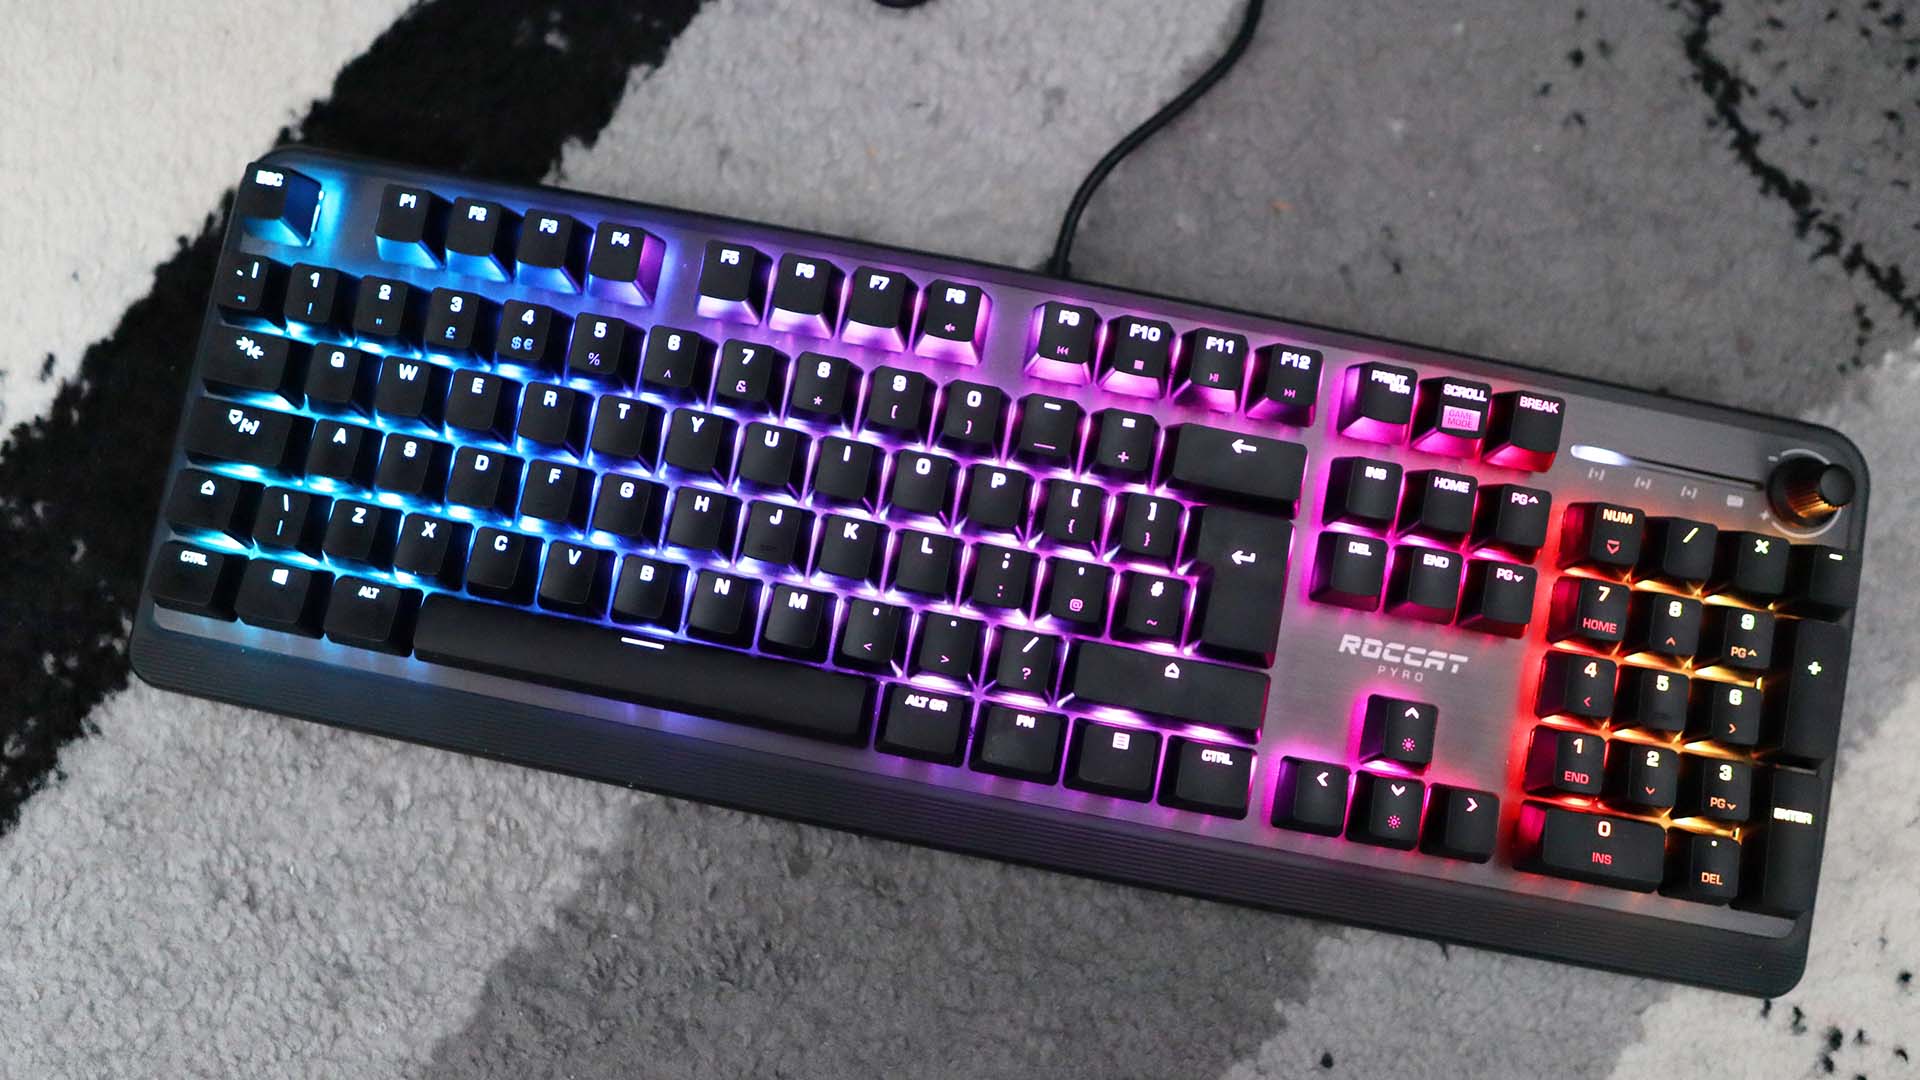  Roccat Pyro review 